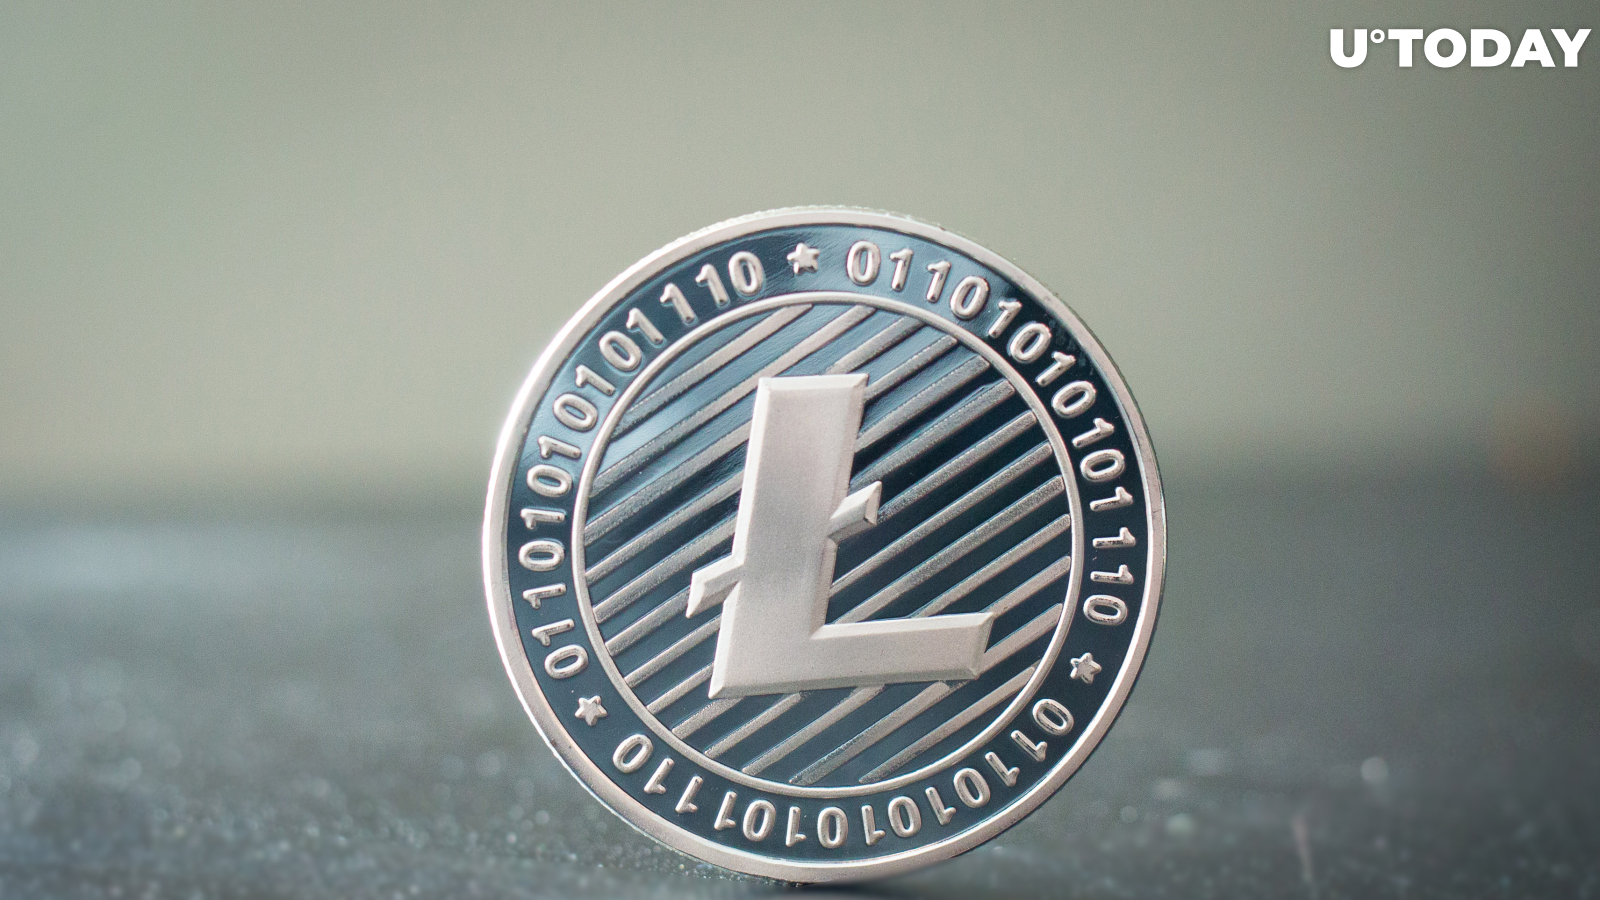 Litecoin, Silver to Bitcoin's Gold, Turns 9 